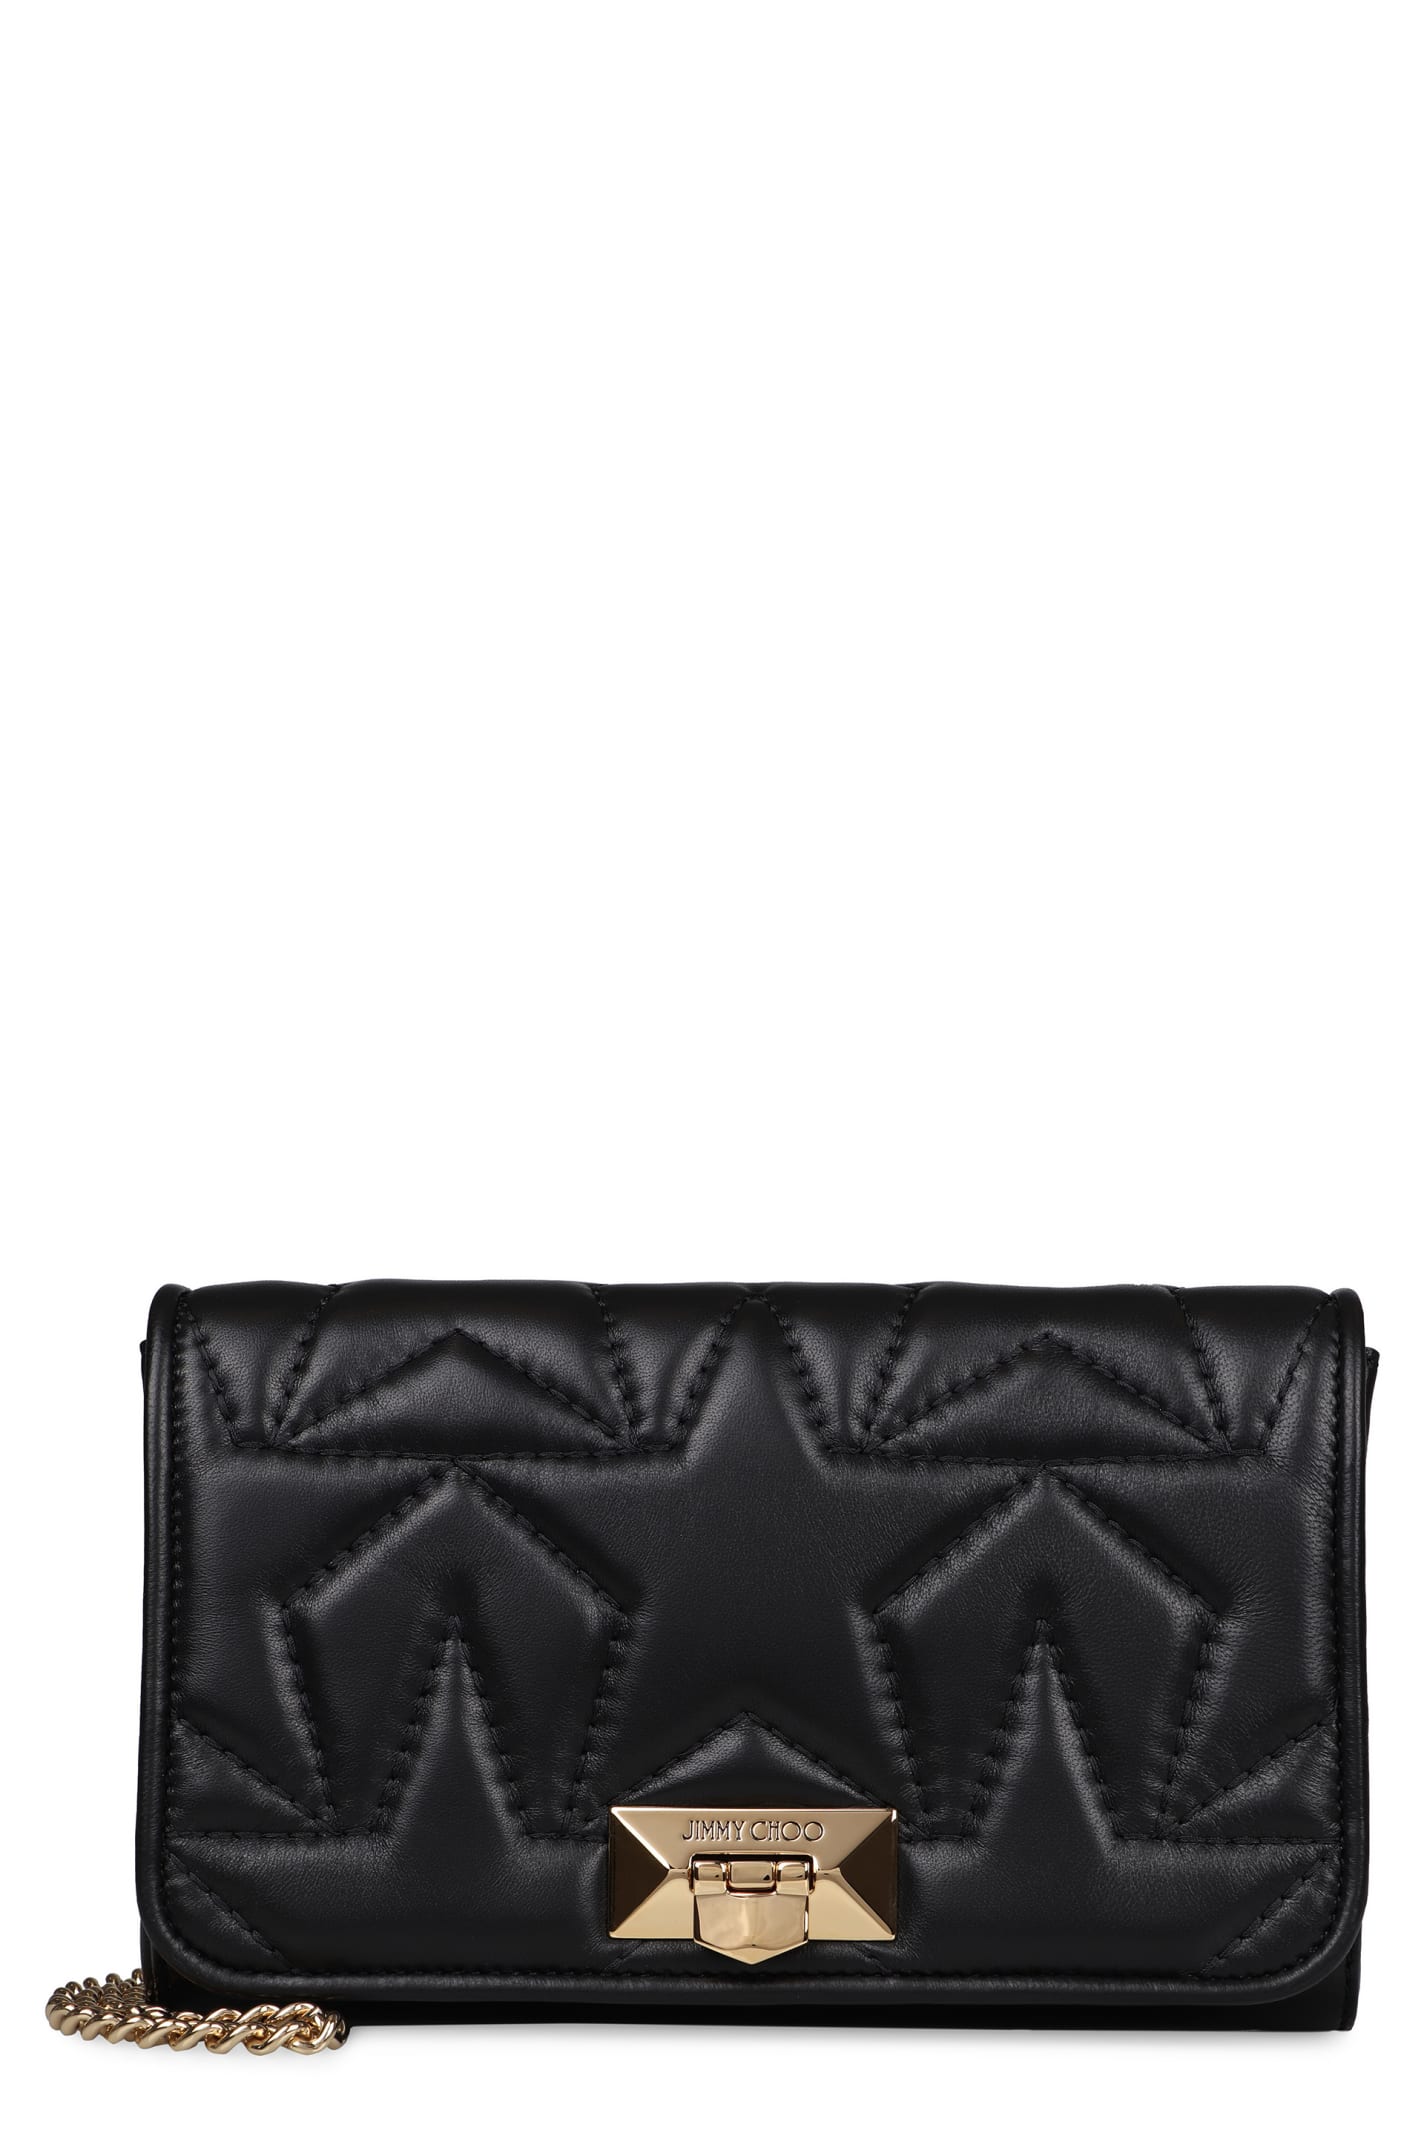 Jimmy Choo Helia Clutch Quilted Leather Shoulder Bag